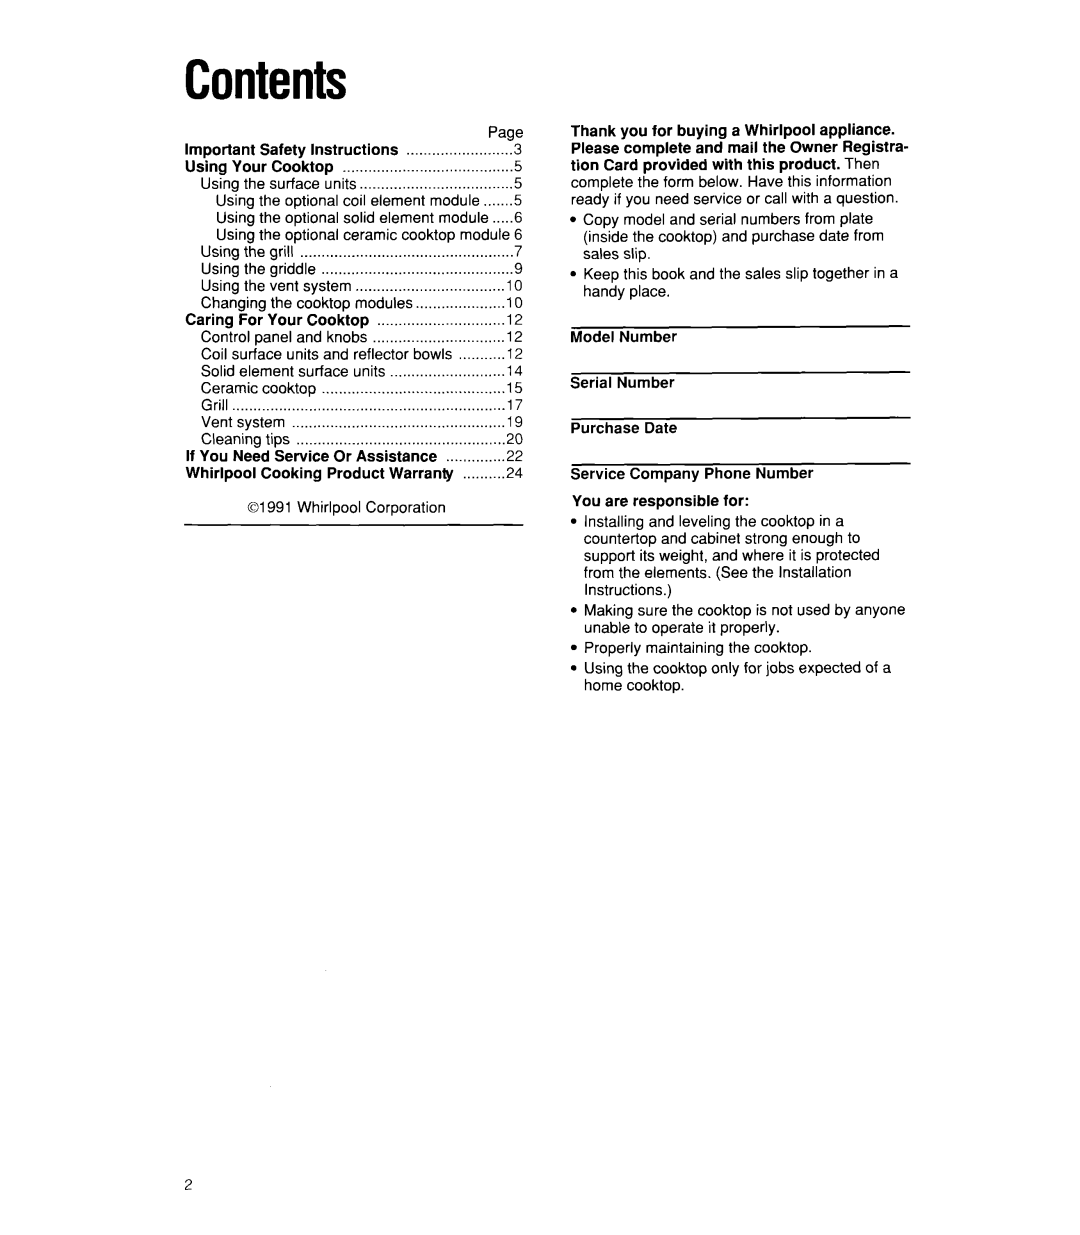 Whirlpool RC8900XX manual Contents 